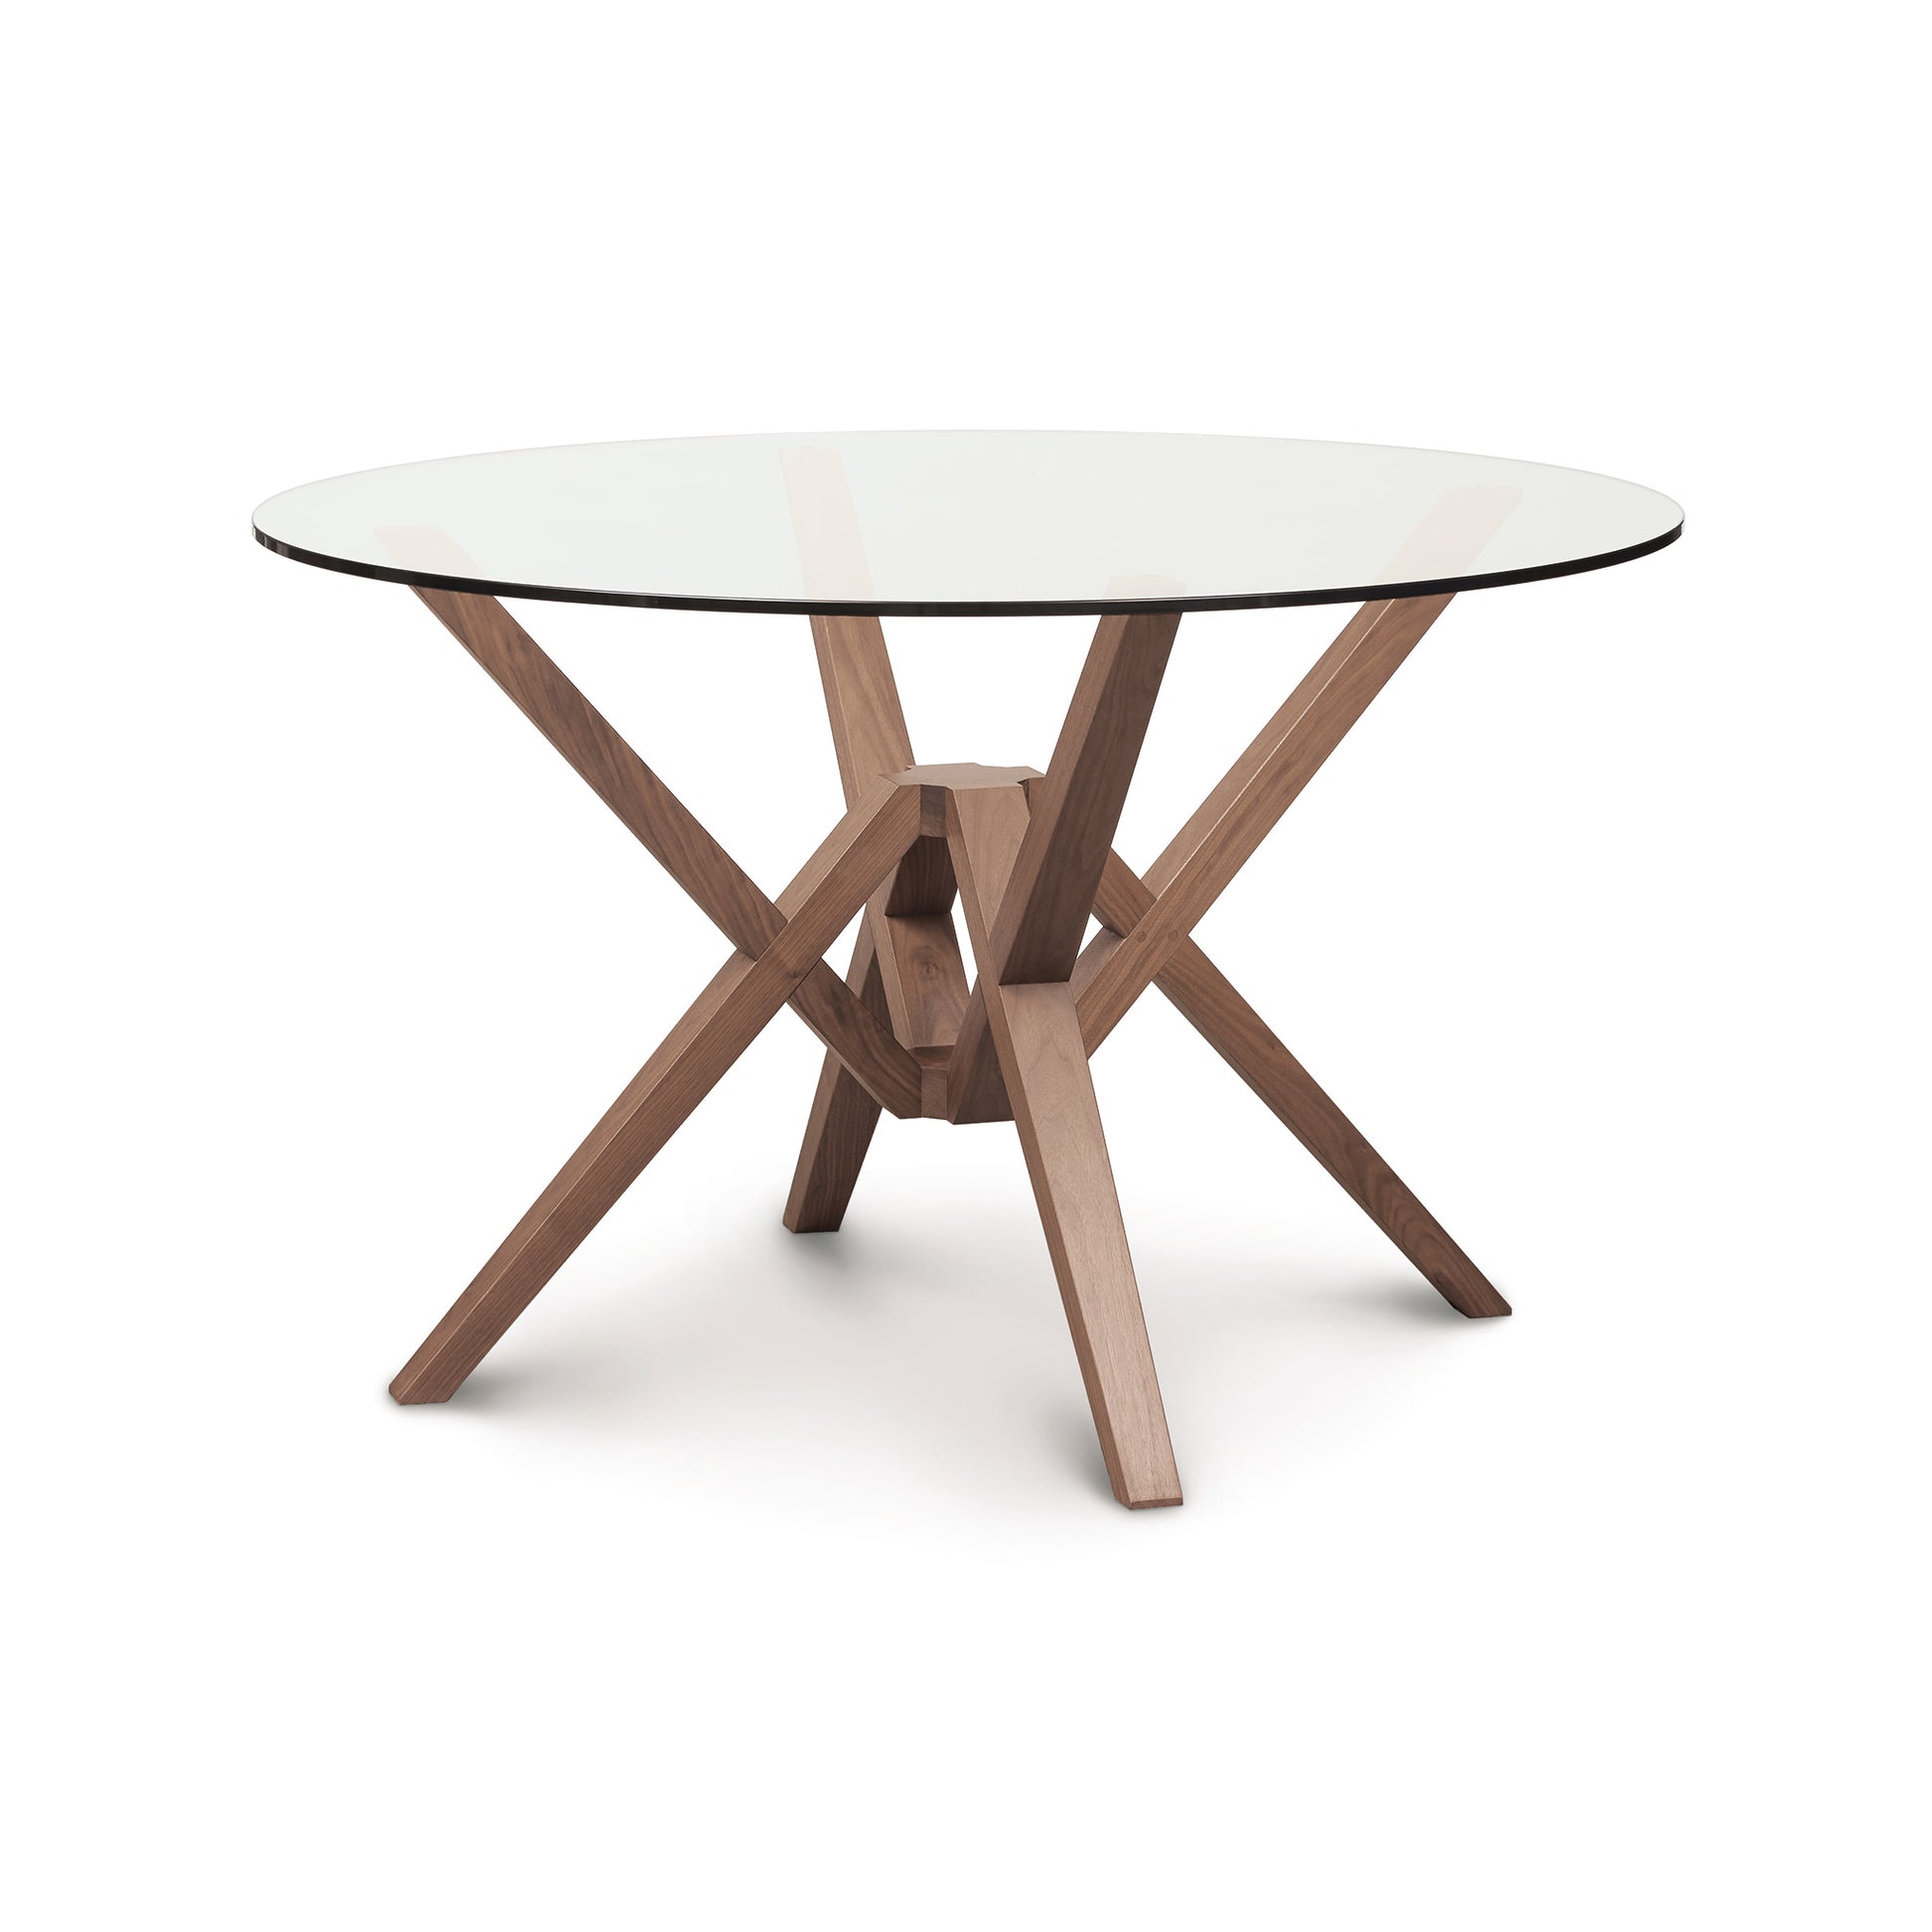 An Copeland Furniture Exeter Round Glass Top Table, showcasing a solid wood base in a wooden cross design, isolated on a white background.